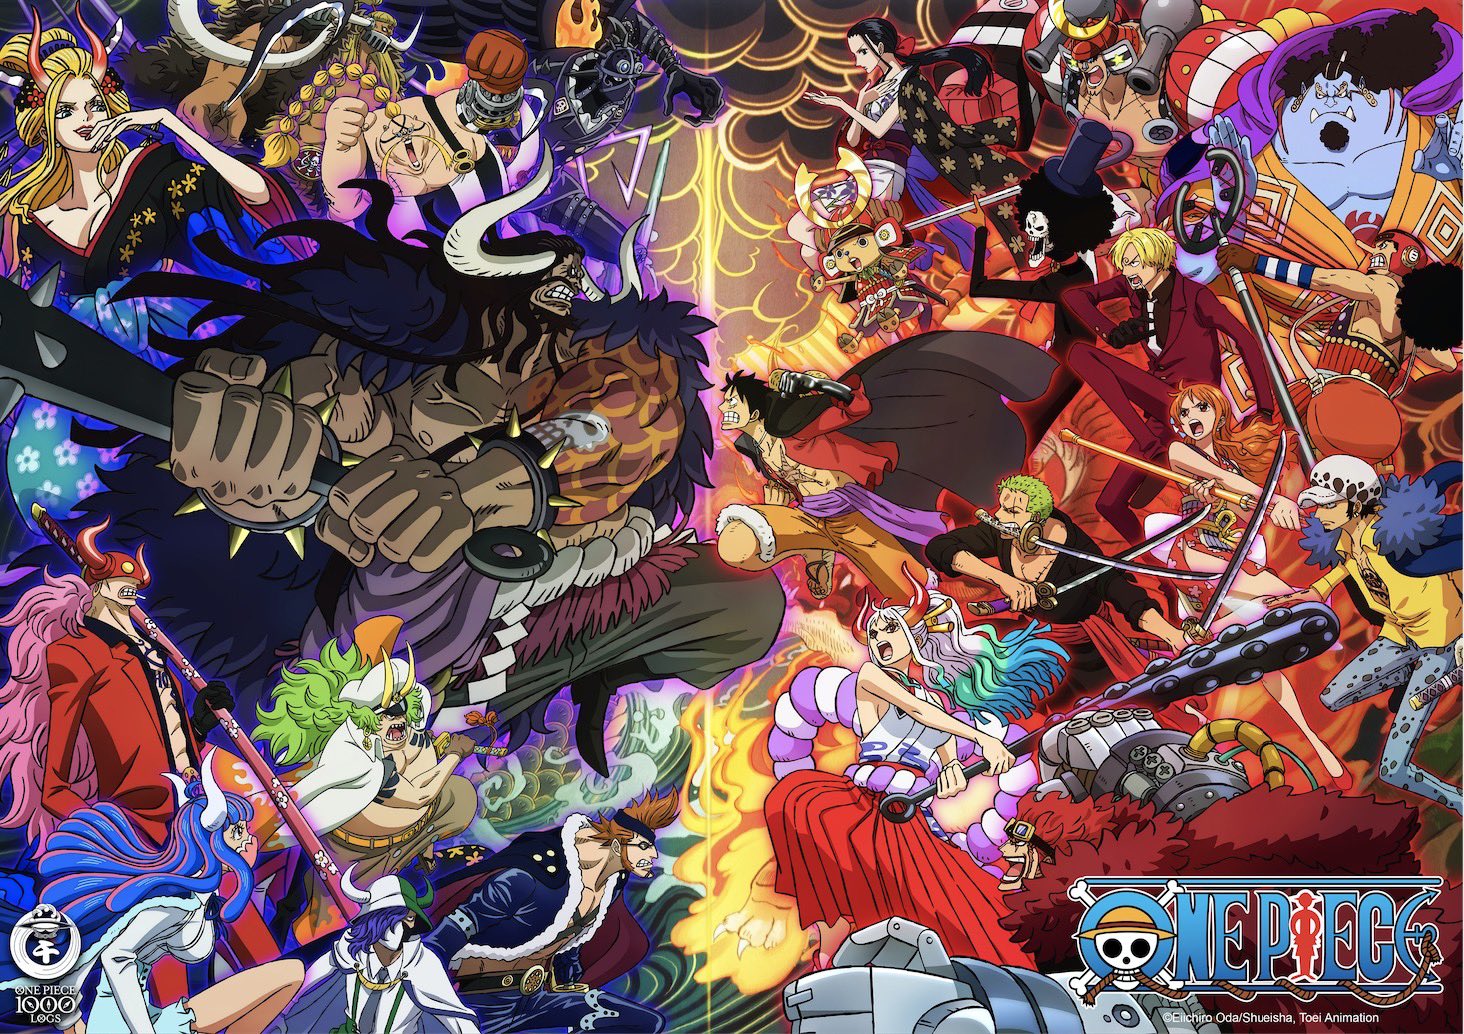 Toei Animation New Commemorative Visual For The 1000th Episode Of One Piece Revealed Depicting The Battle Between The Straw Hats Yamato And The Beasts Pirates The 1000th Episode Will Be